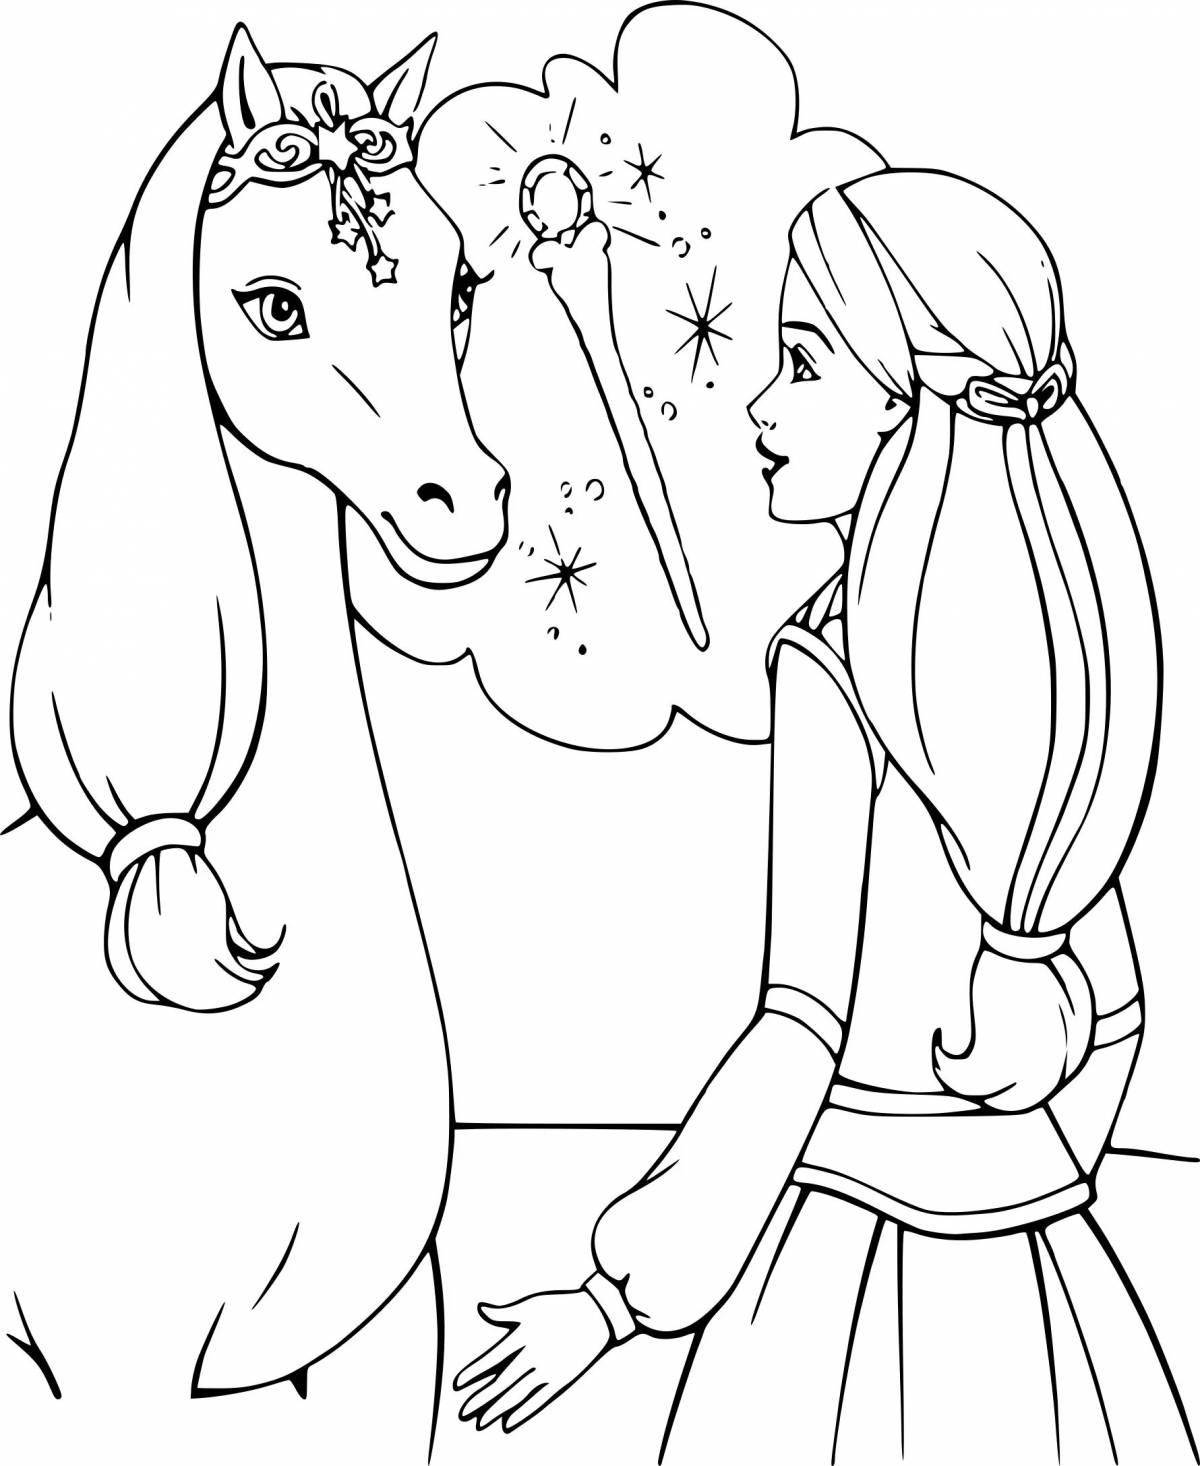 Coloring page wild barbie on a horse